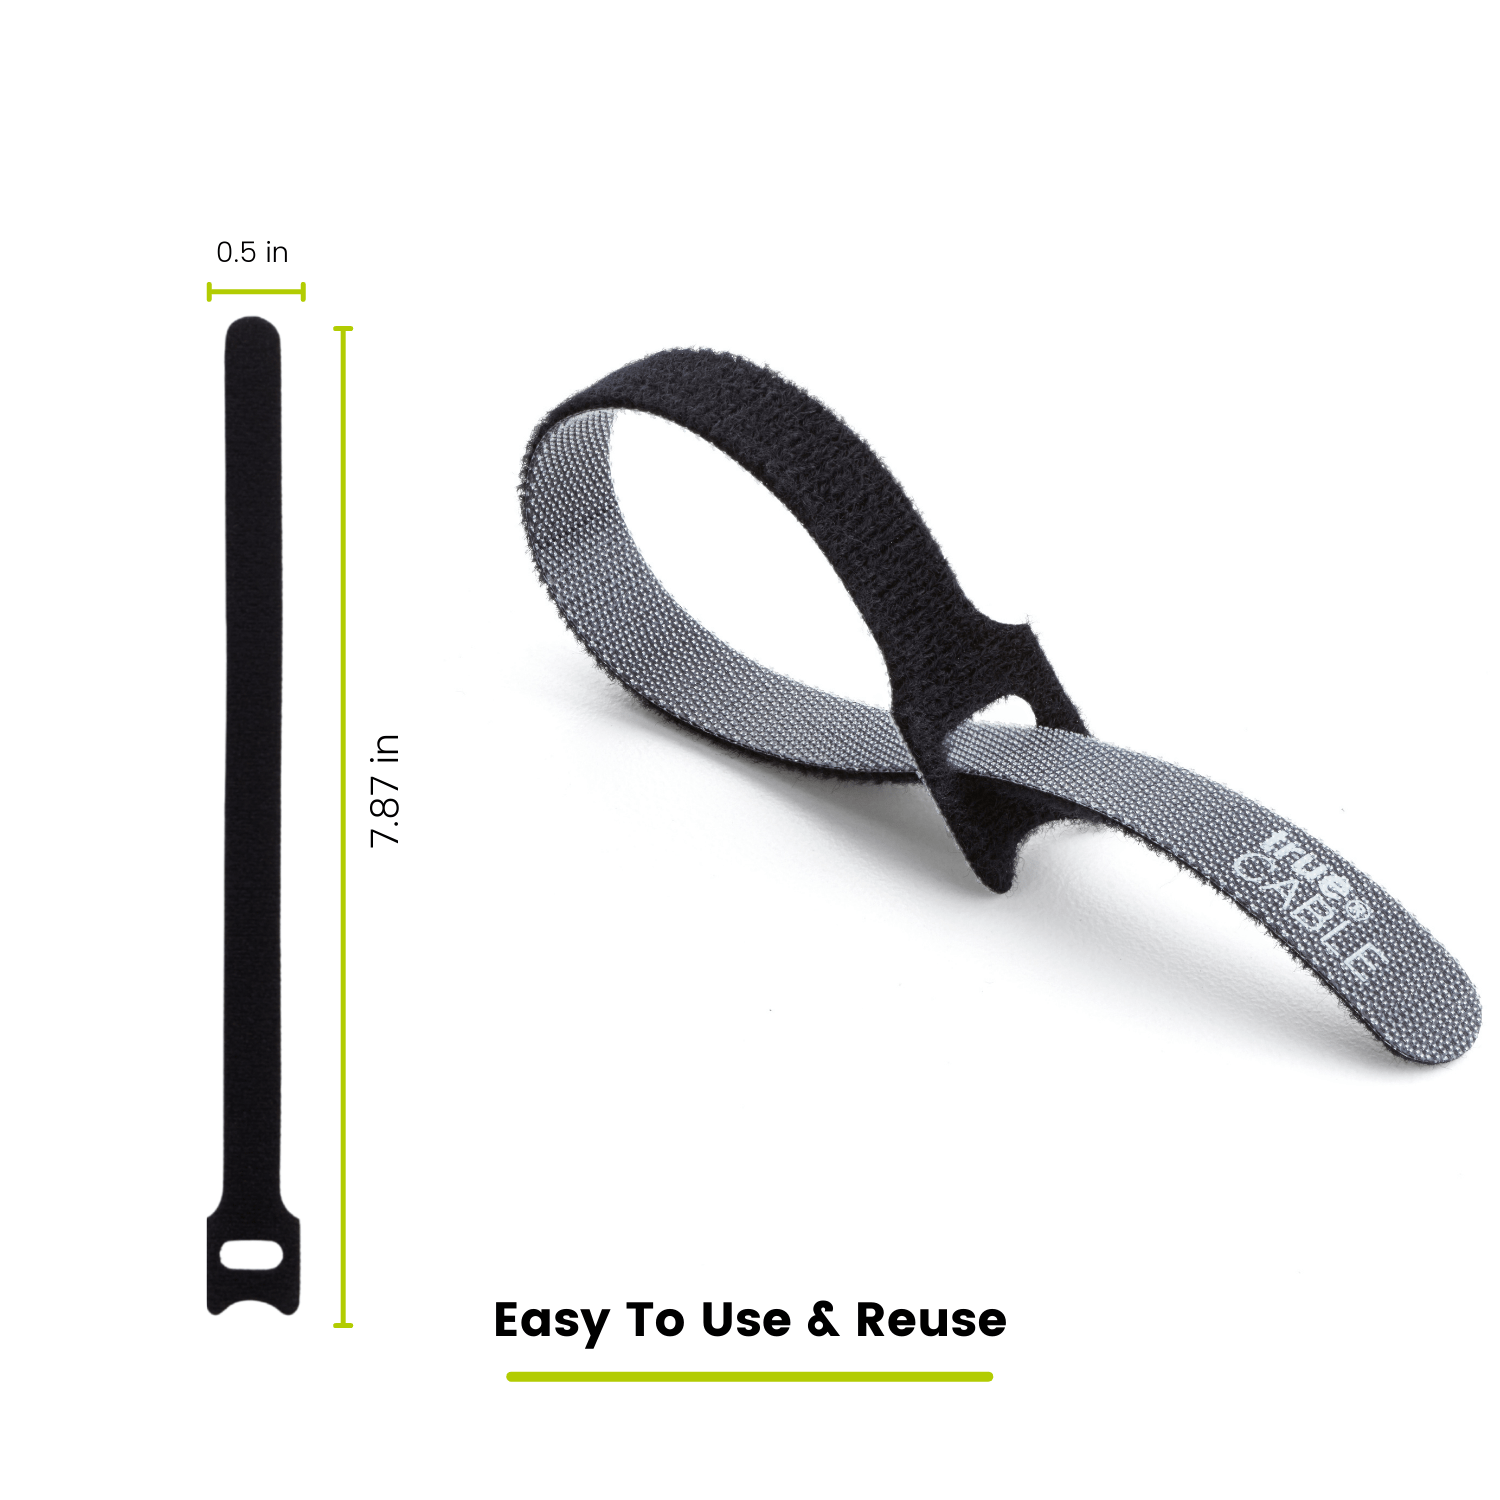 Hook and Loop Strap, Reusable Fastening Cable Tie Down Straps by